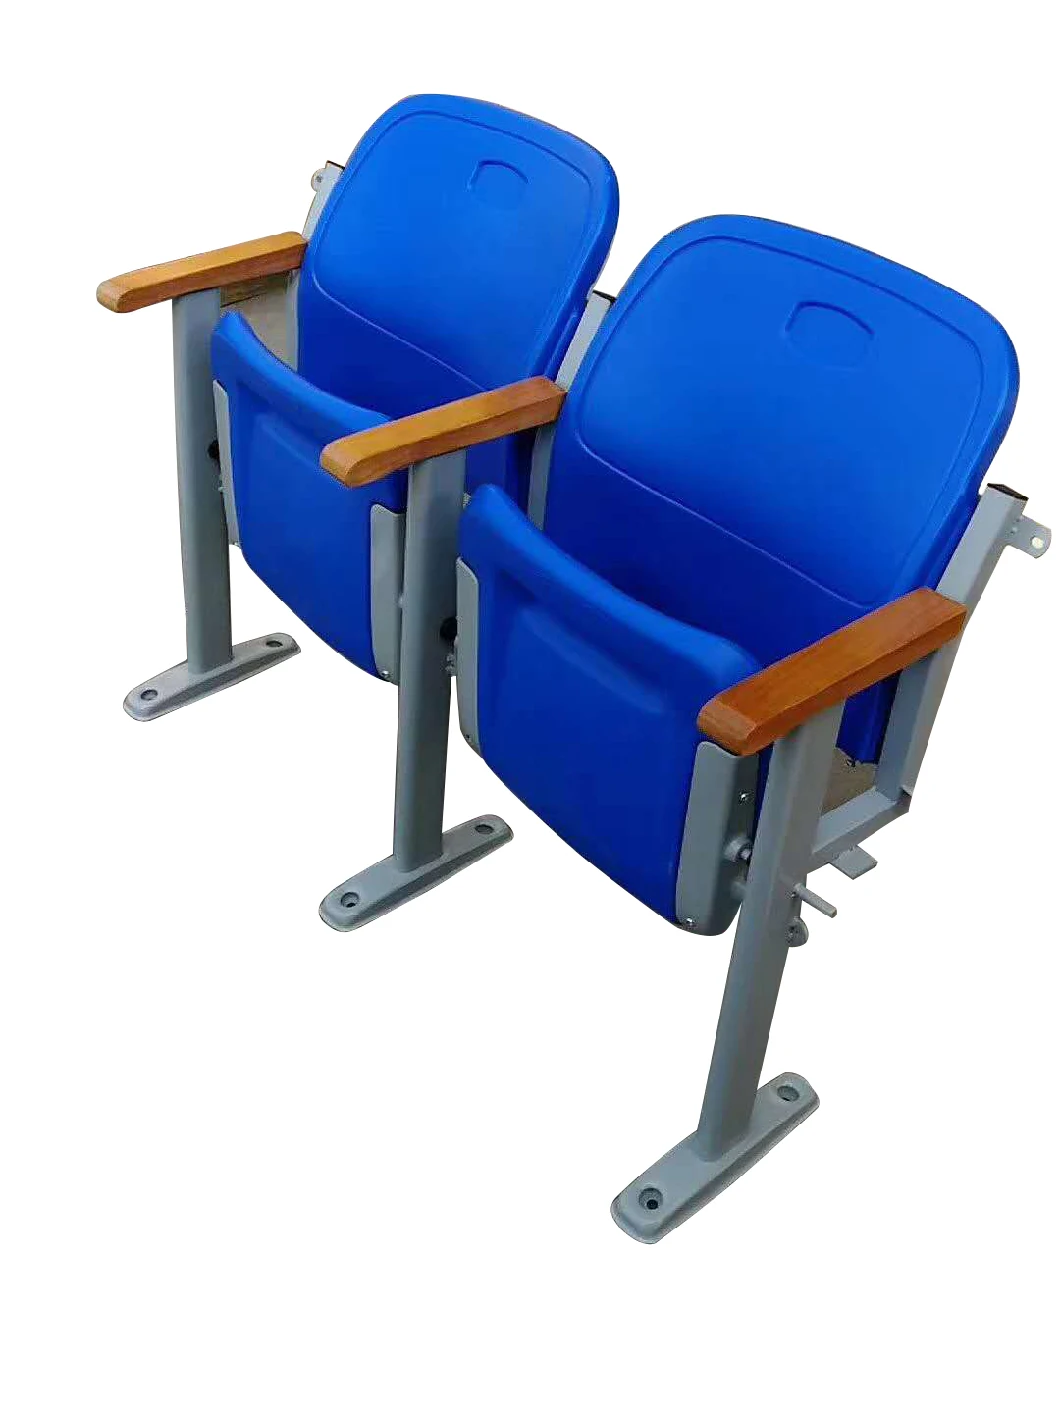 Outdoor Cheap Armrest Folding Plastic Chair for Stadium Church Theater Hall Conference Room